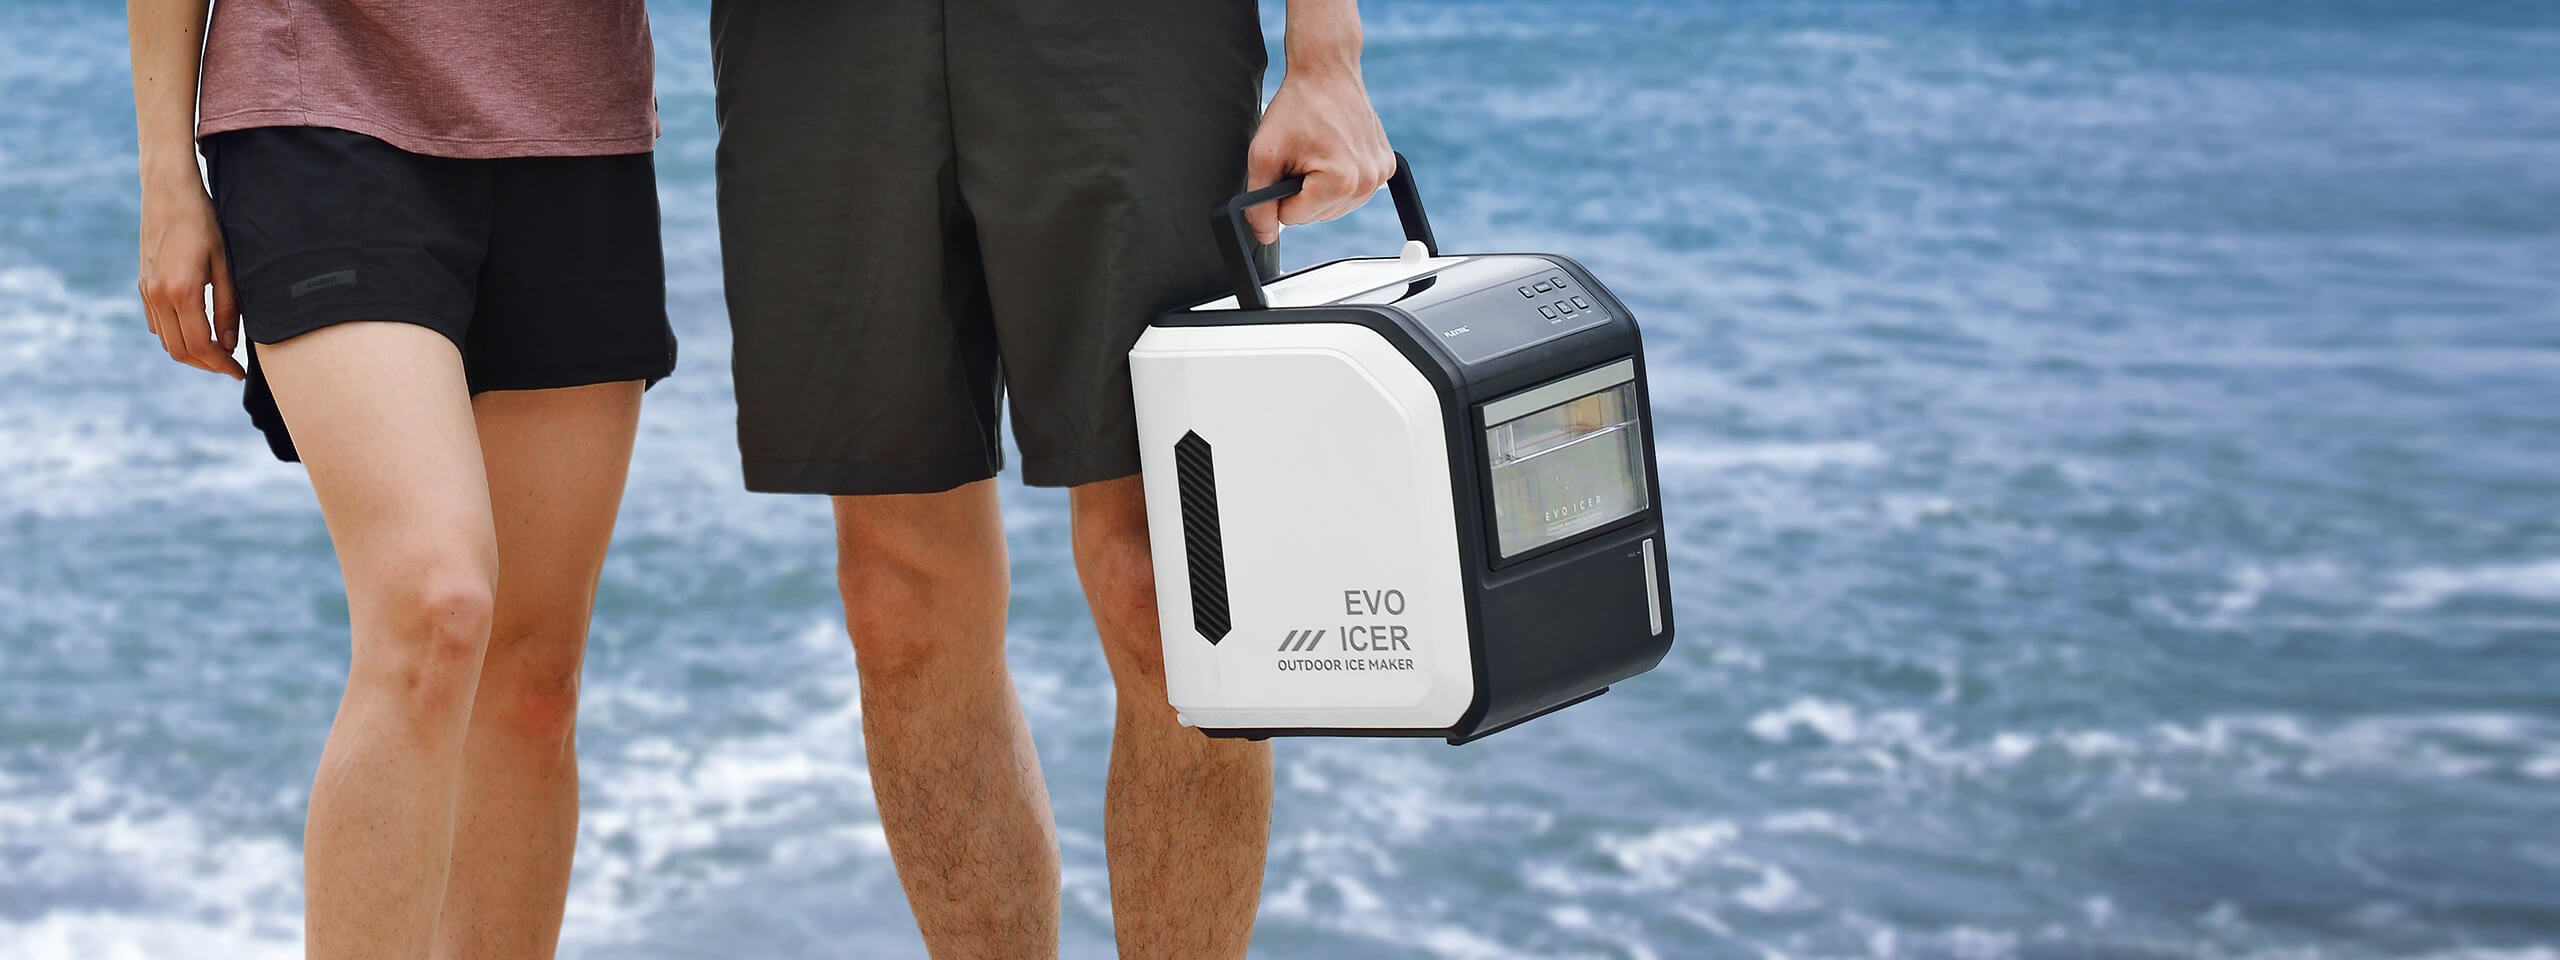 Battery-Powered Ice Maker for Outdoors 27